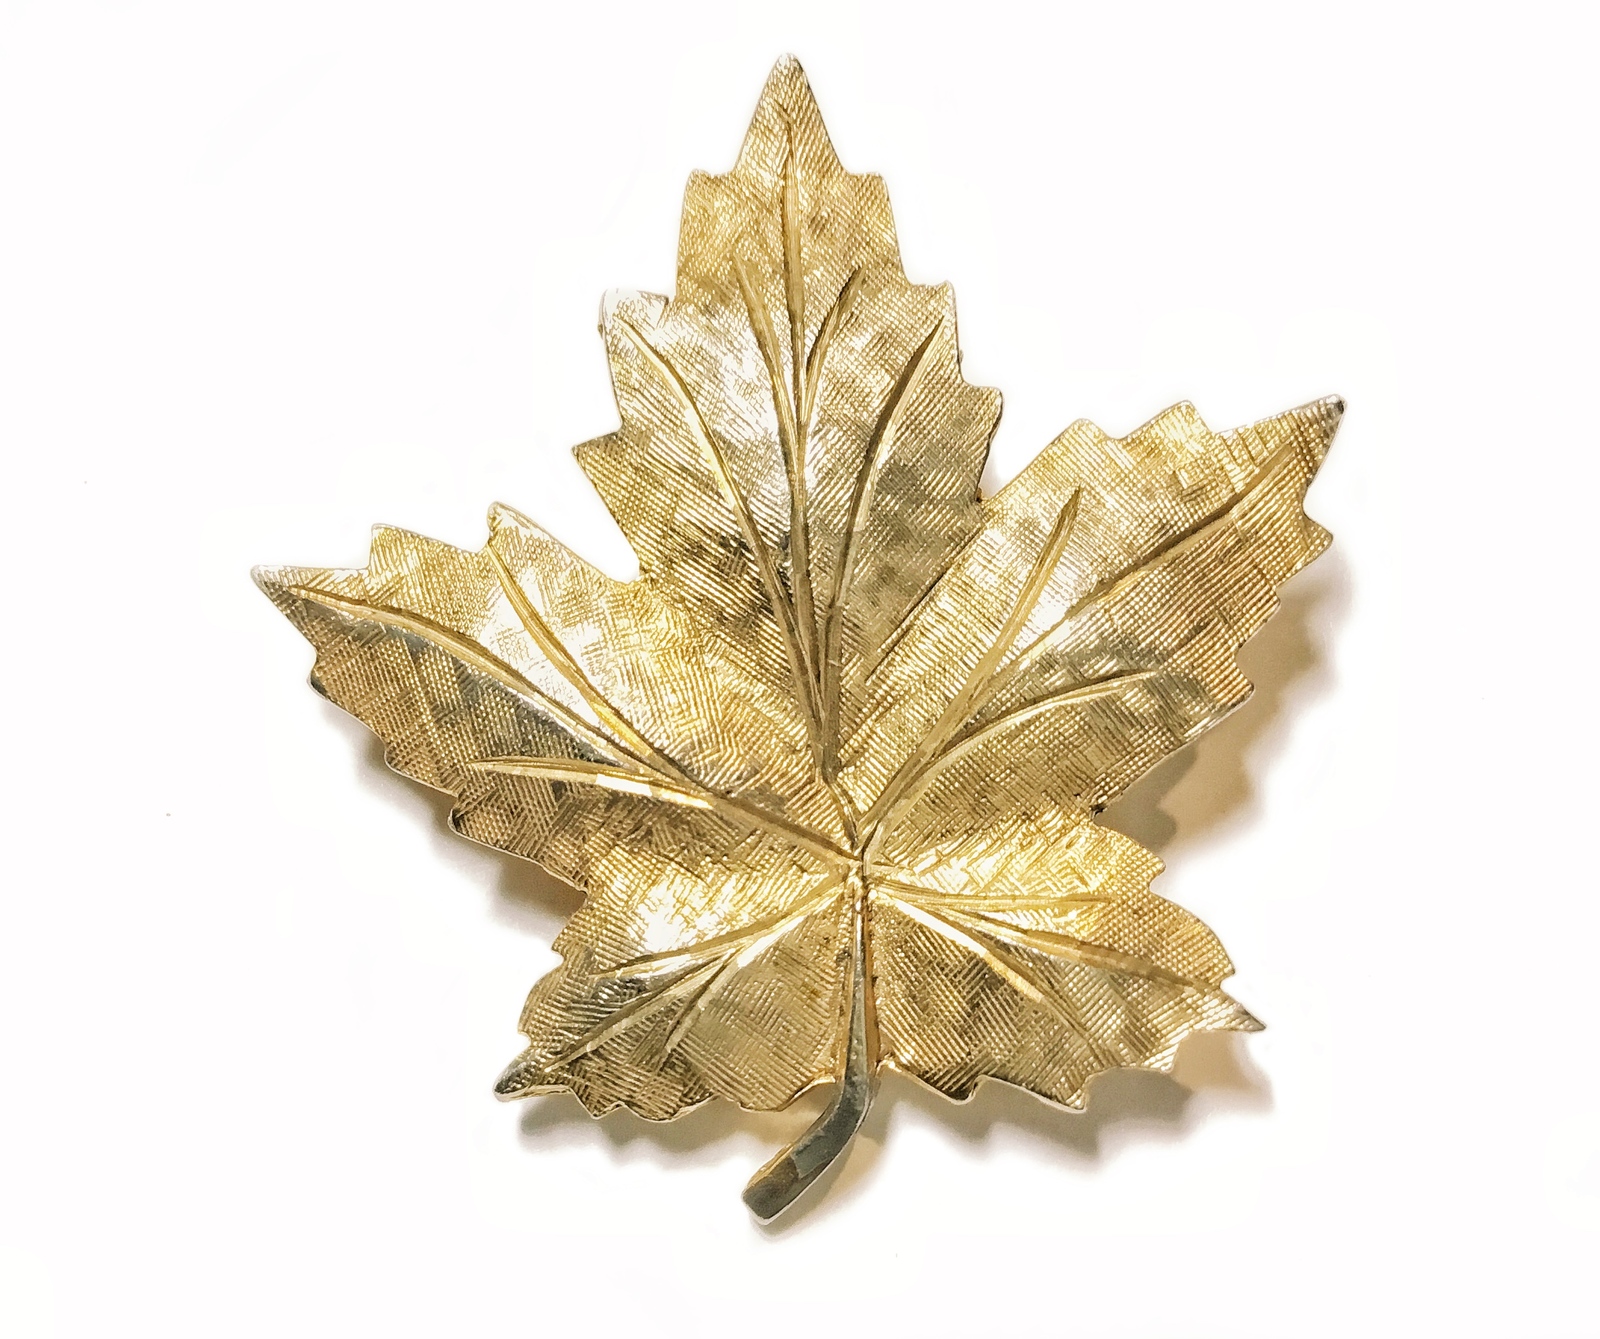 Primary image for Vintage 1960s Keyes of Canada Gold Plated Maple Leaf Brooch with Florentine Fini